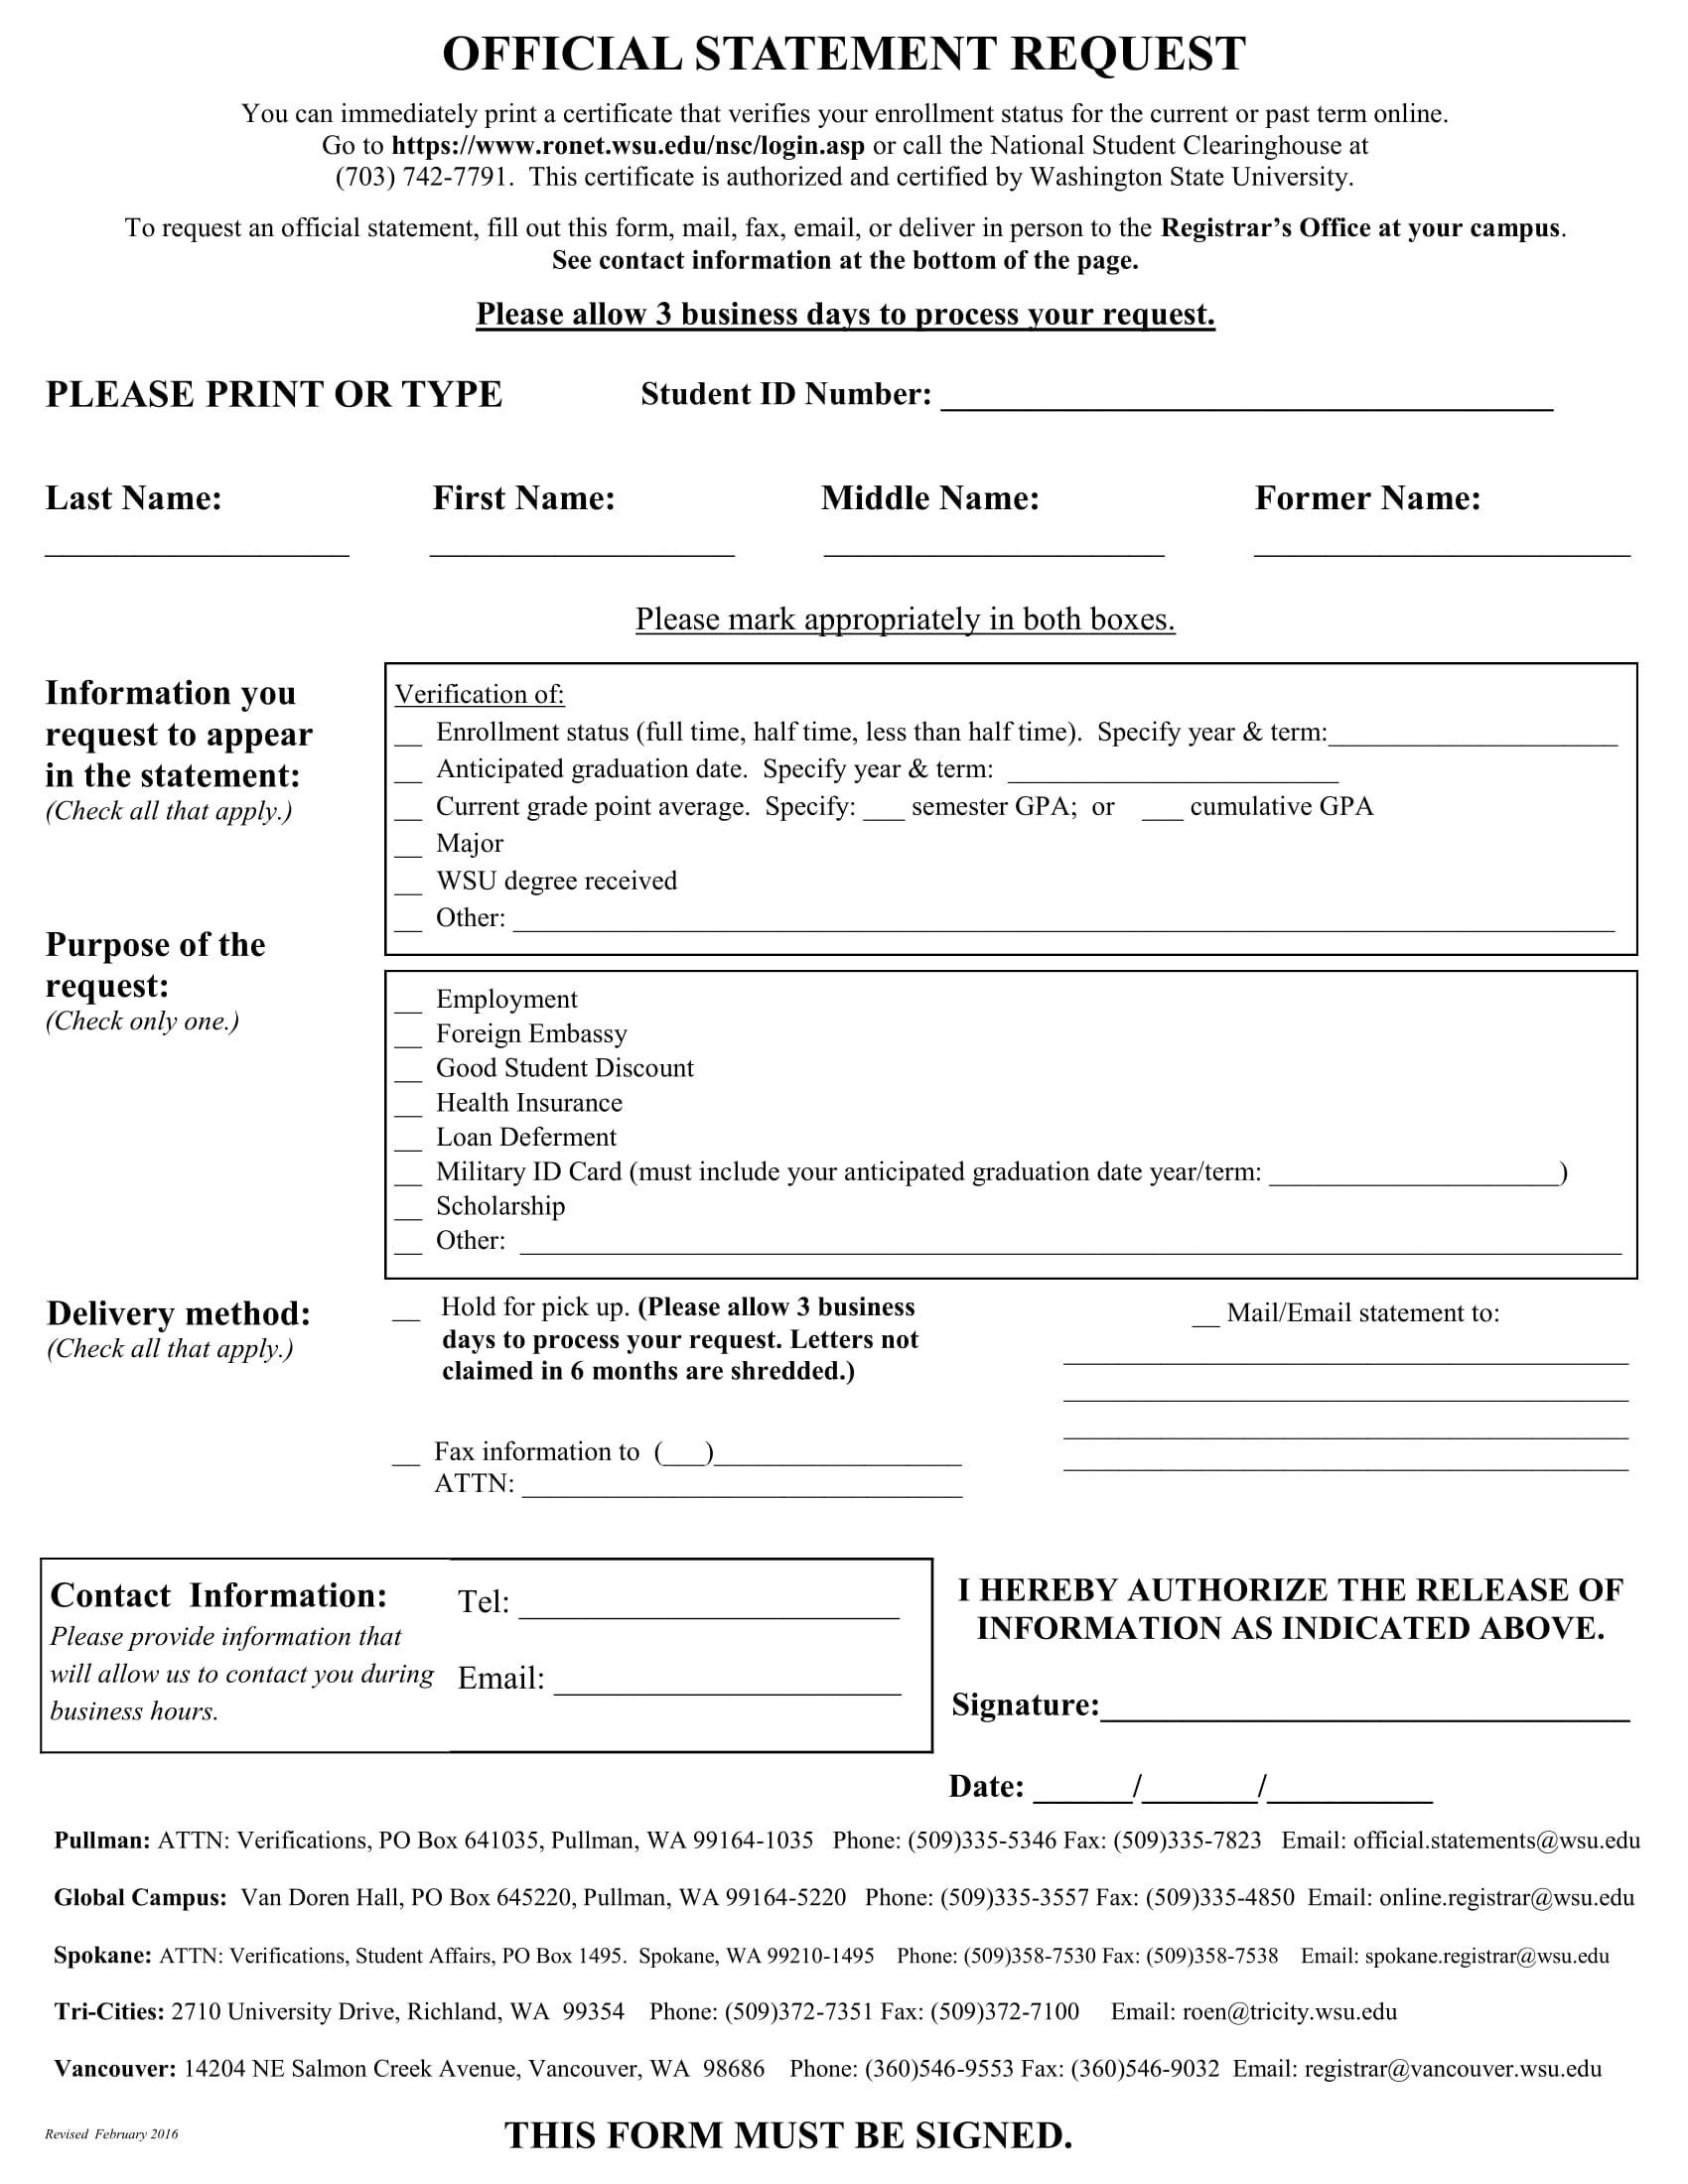 official statement request form 1